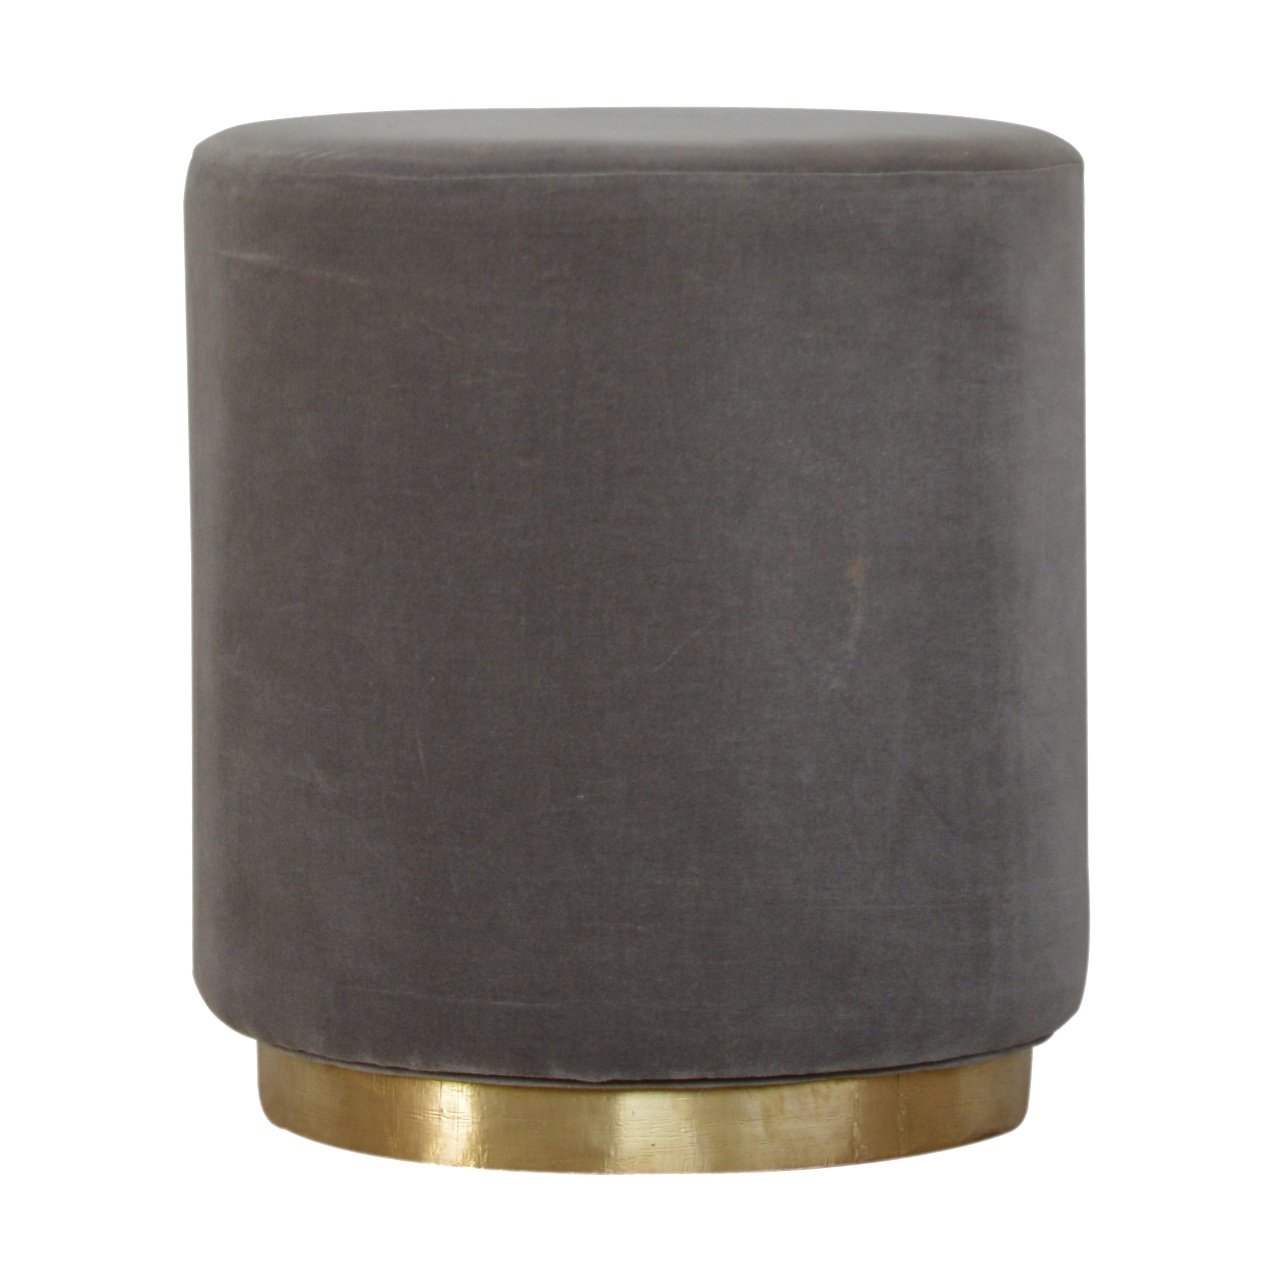 View Grey Velvet Footstool with Gold Base information